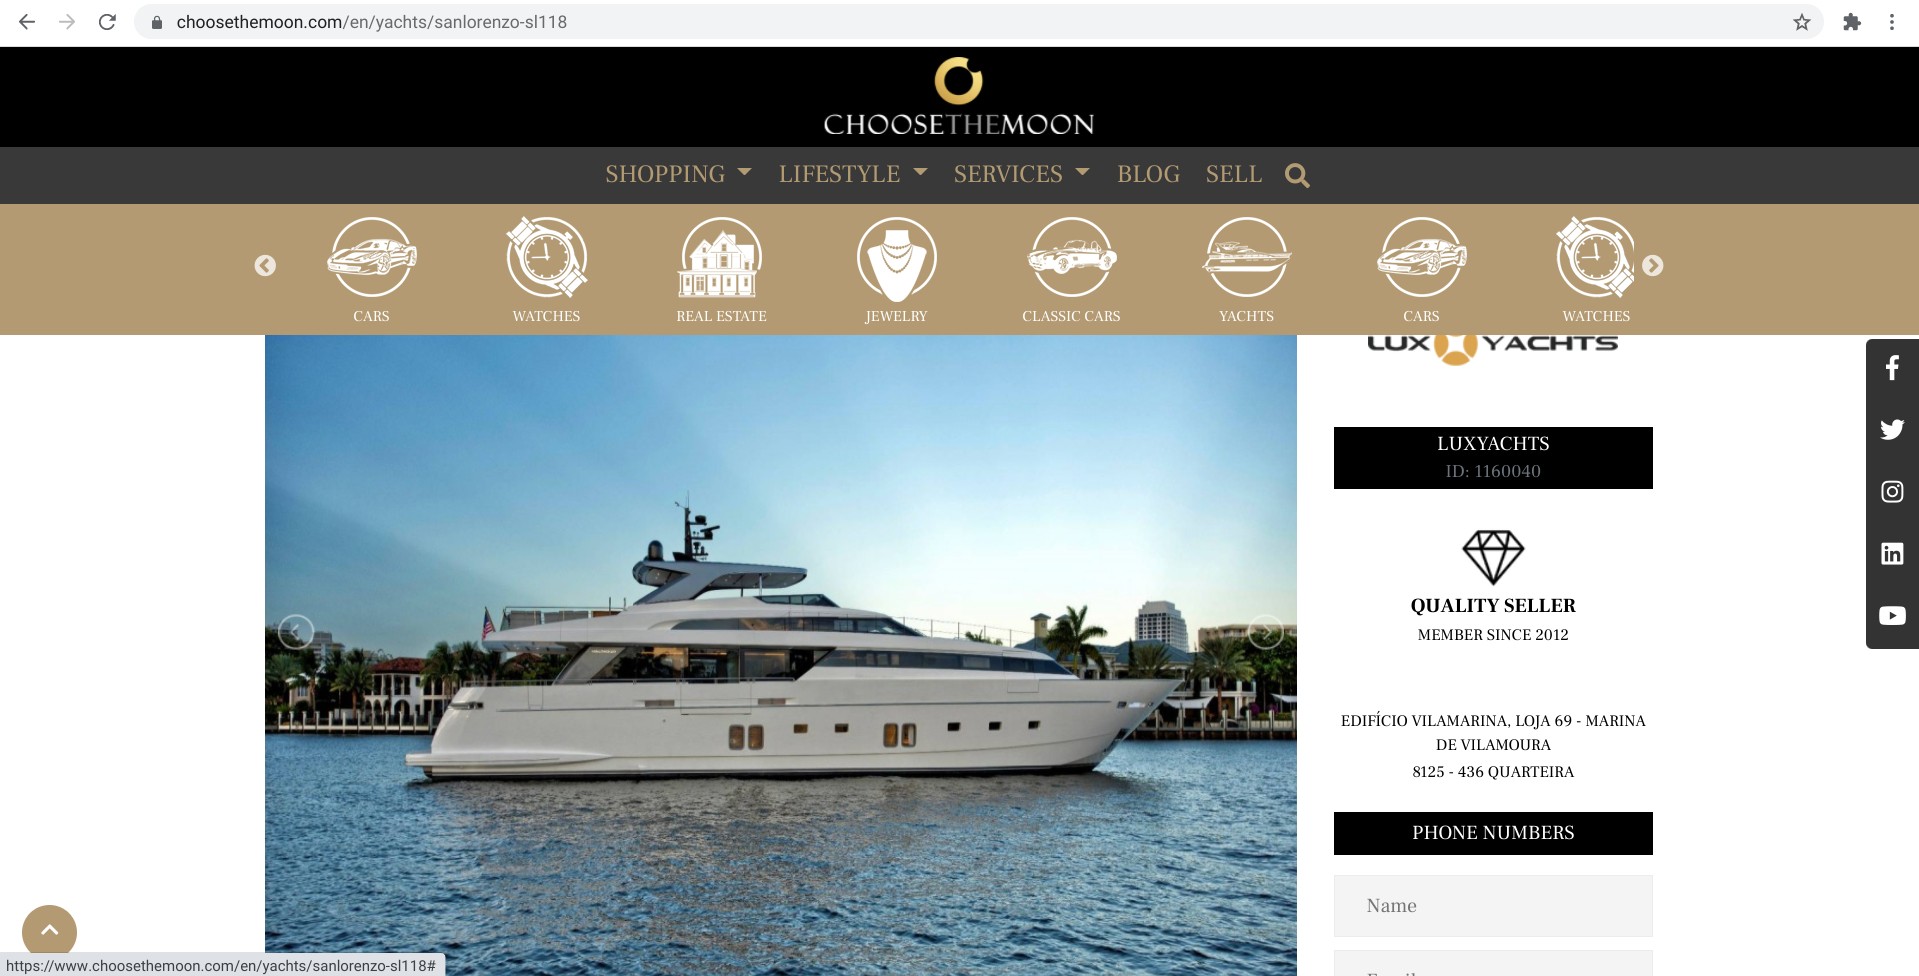 Screenshot of a yacht available for sale on choosethemoon.com